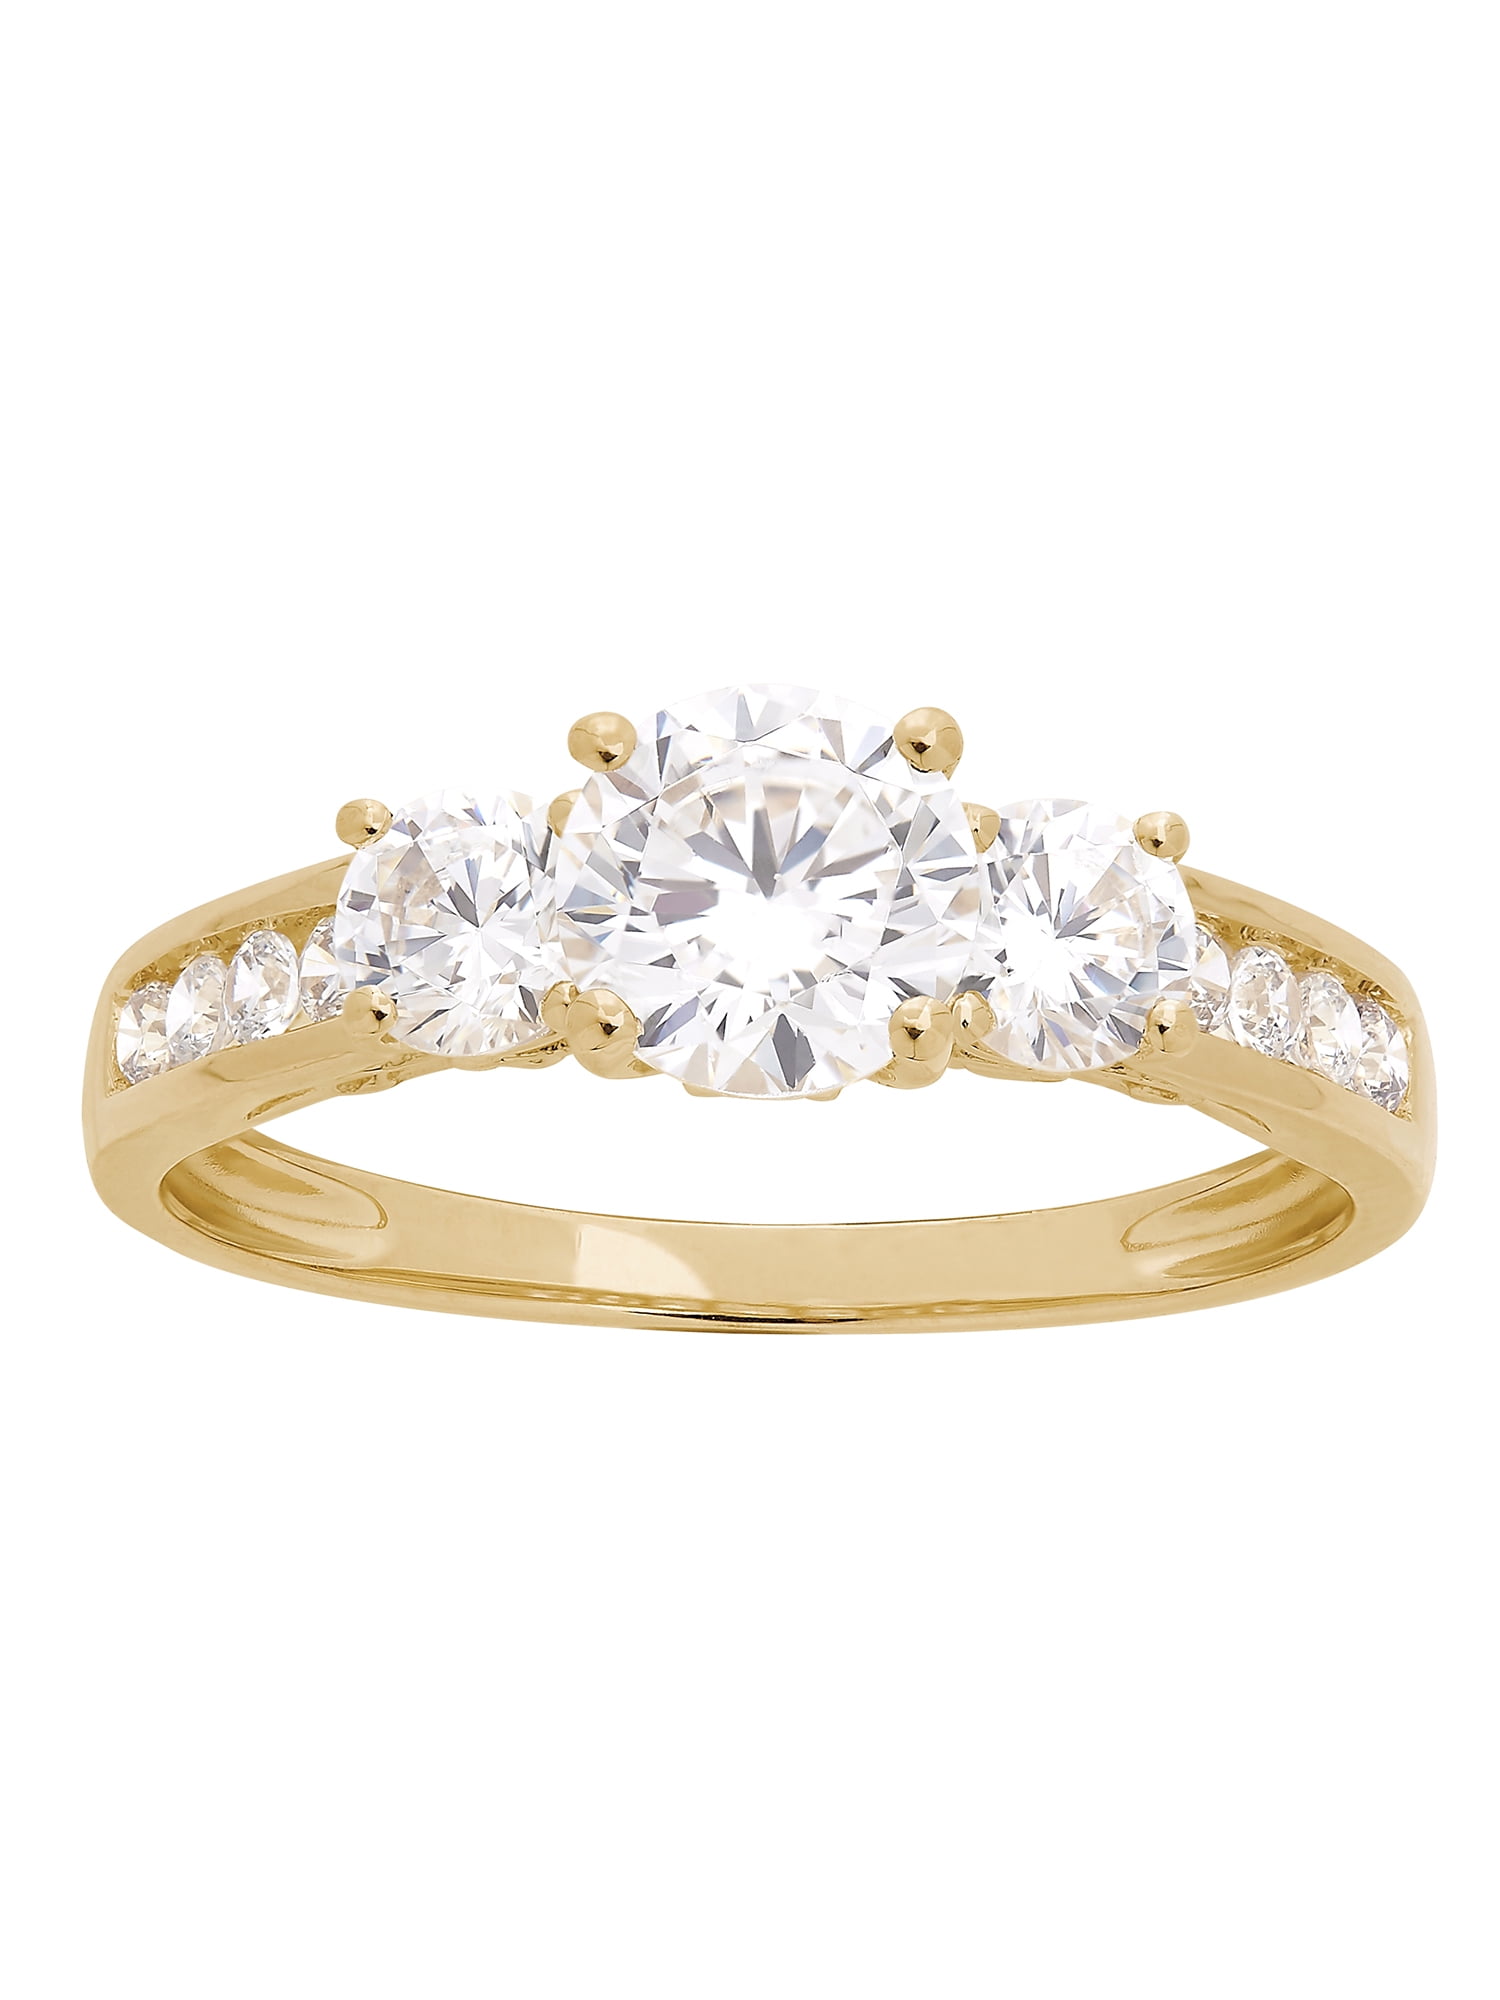 10k Two Tone Gold Square & Round White CZ Simulated April Birthstone Halo Ladies Ring